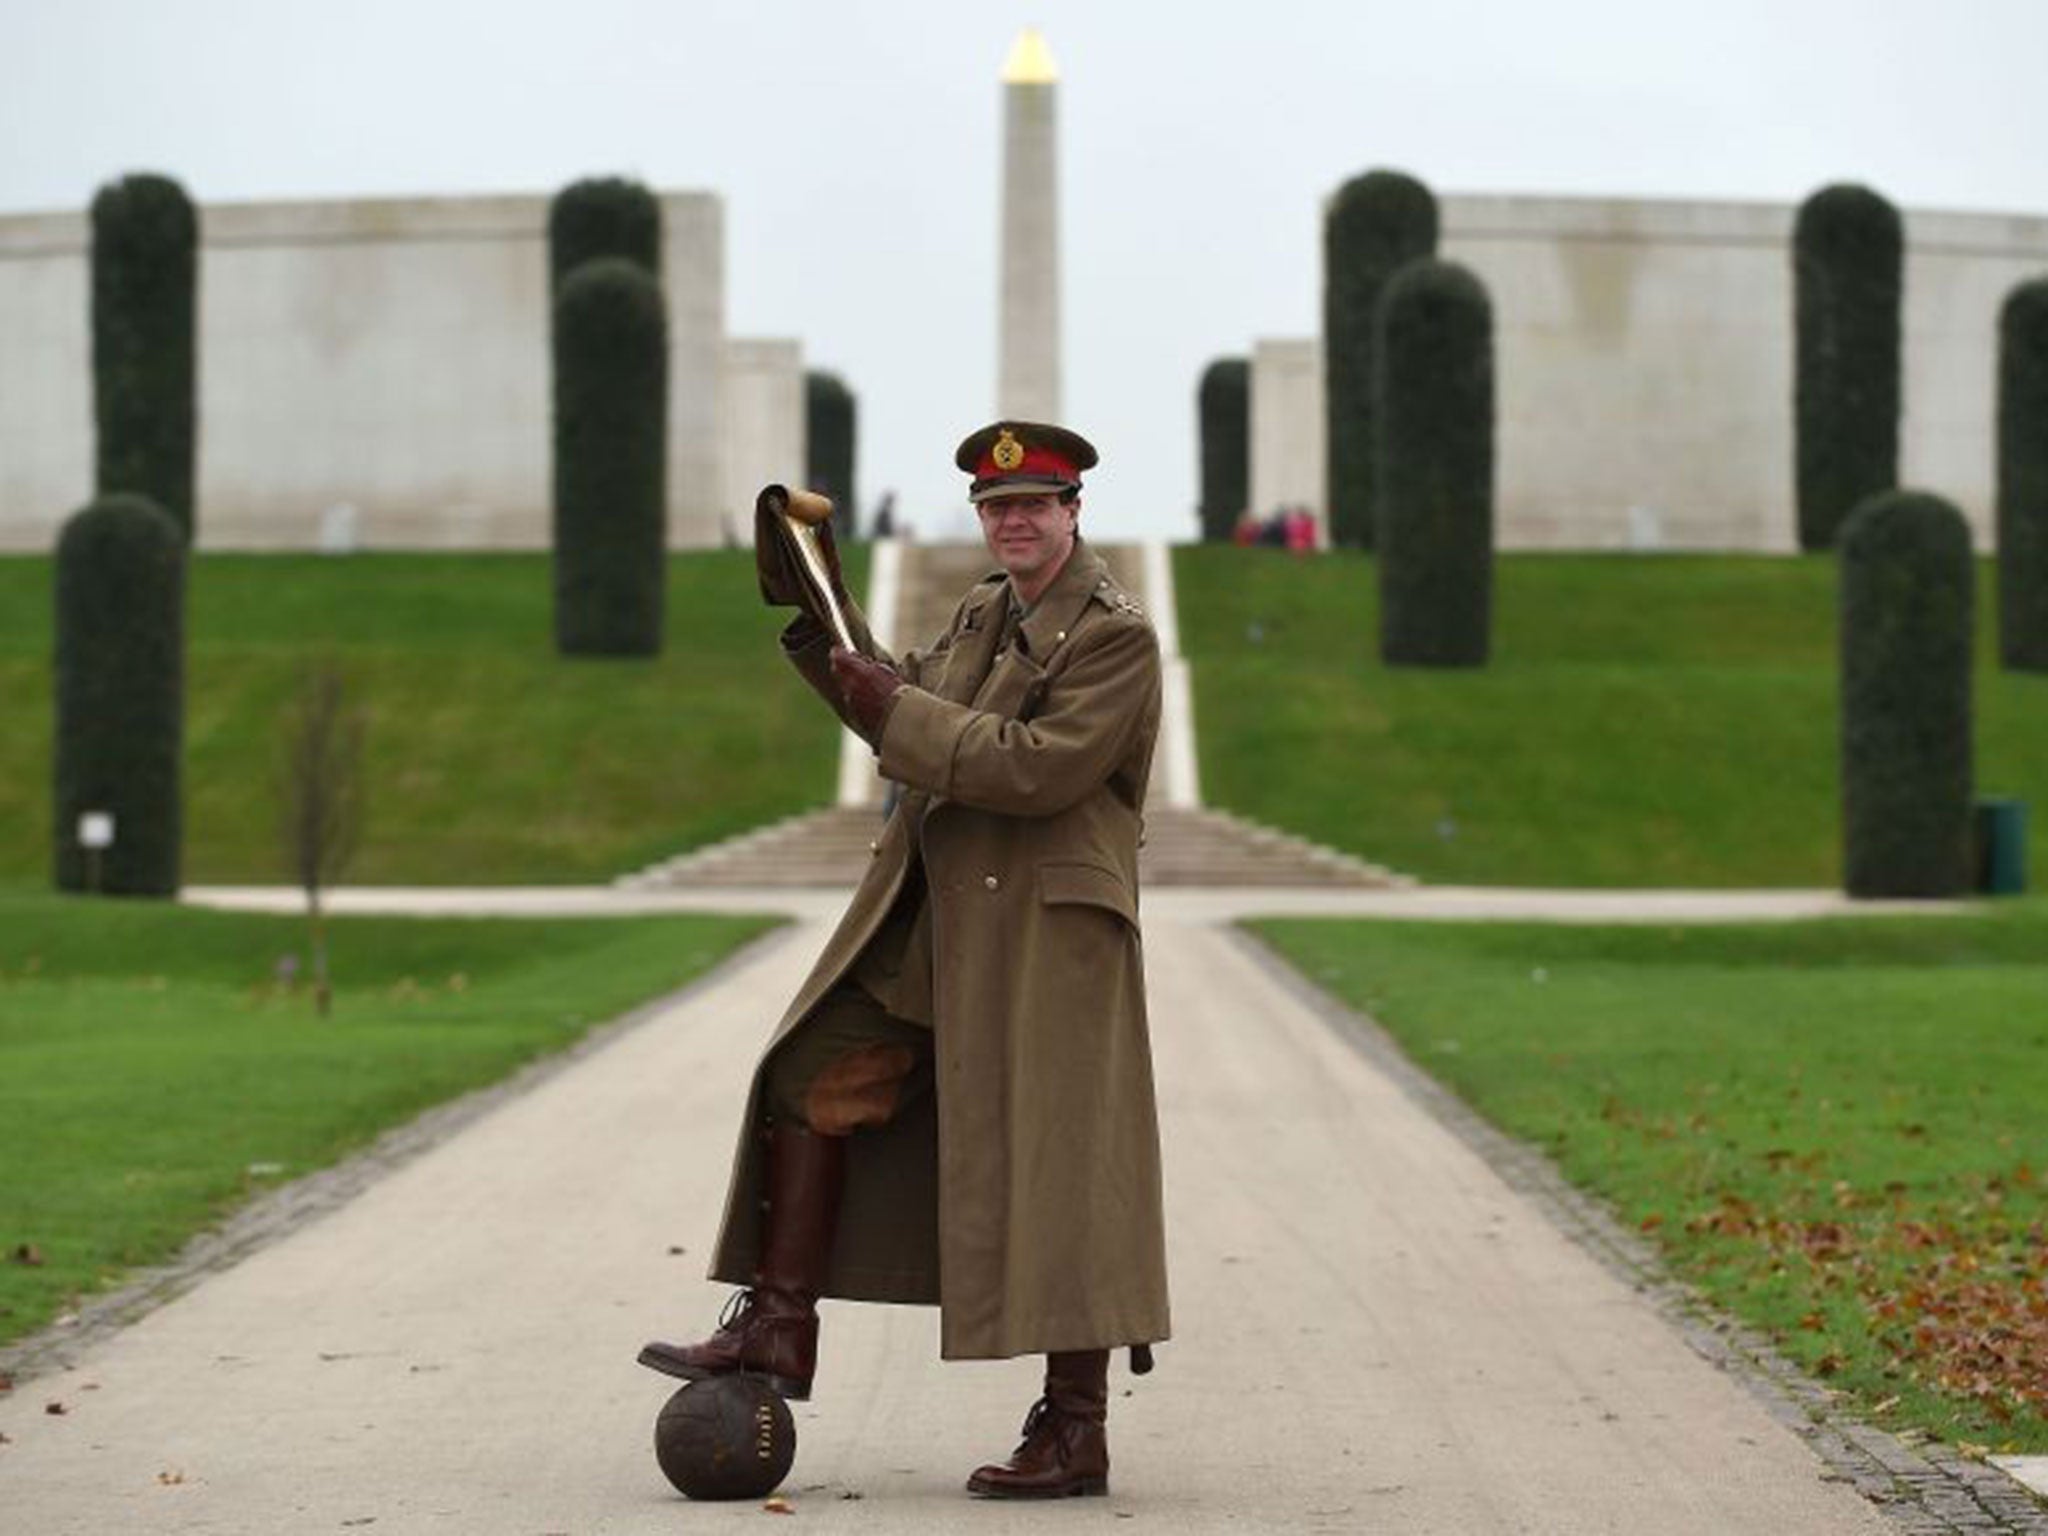 WW1 reenactor Paul Thompson, dressed in the uniform of a First World War General amongst the Shot at Dawn memorial at the National Memorial Arboretum in Alrewas, Staffordshire, reads a letter written by General Walter Congreve VC to his wife during the Fi